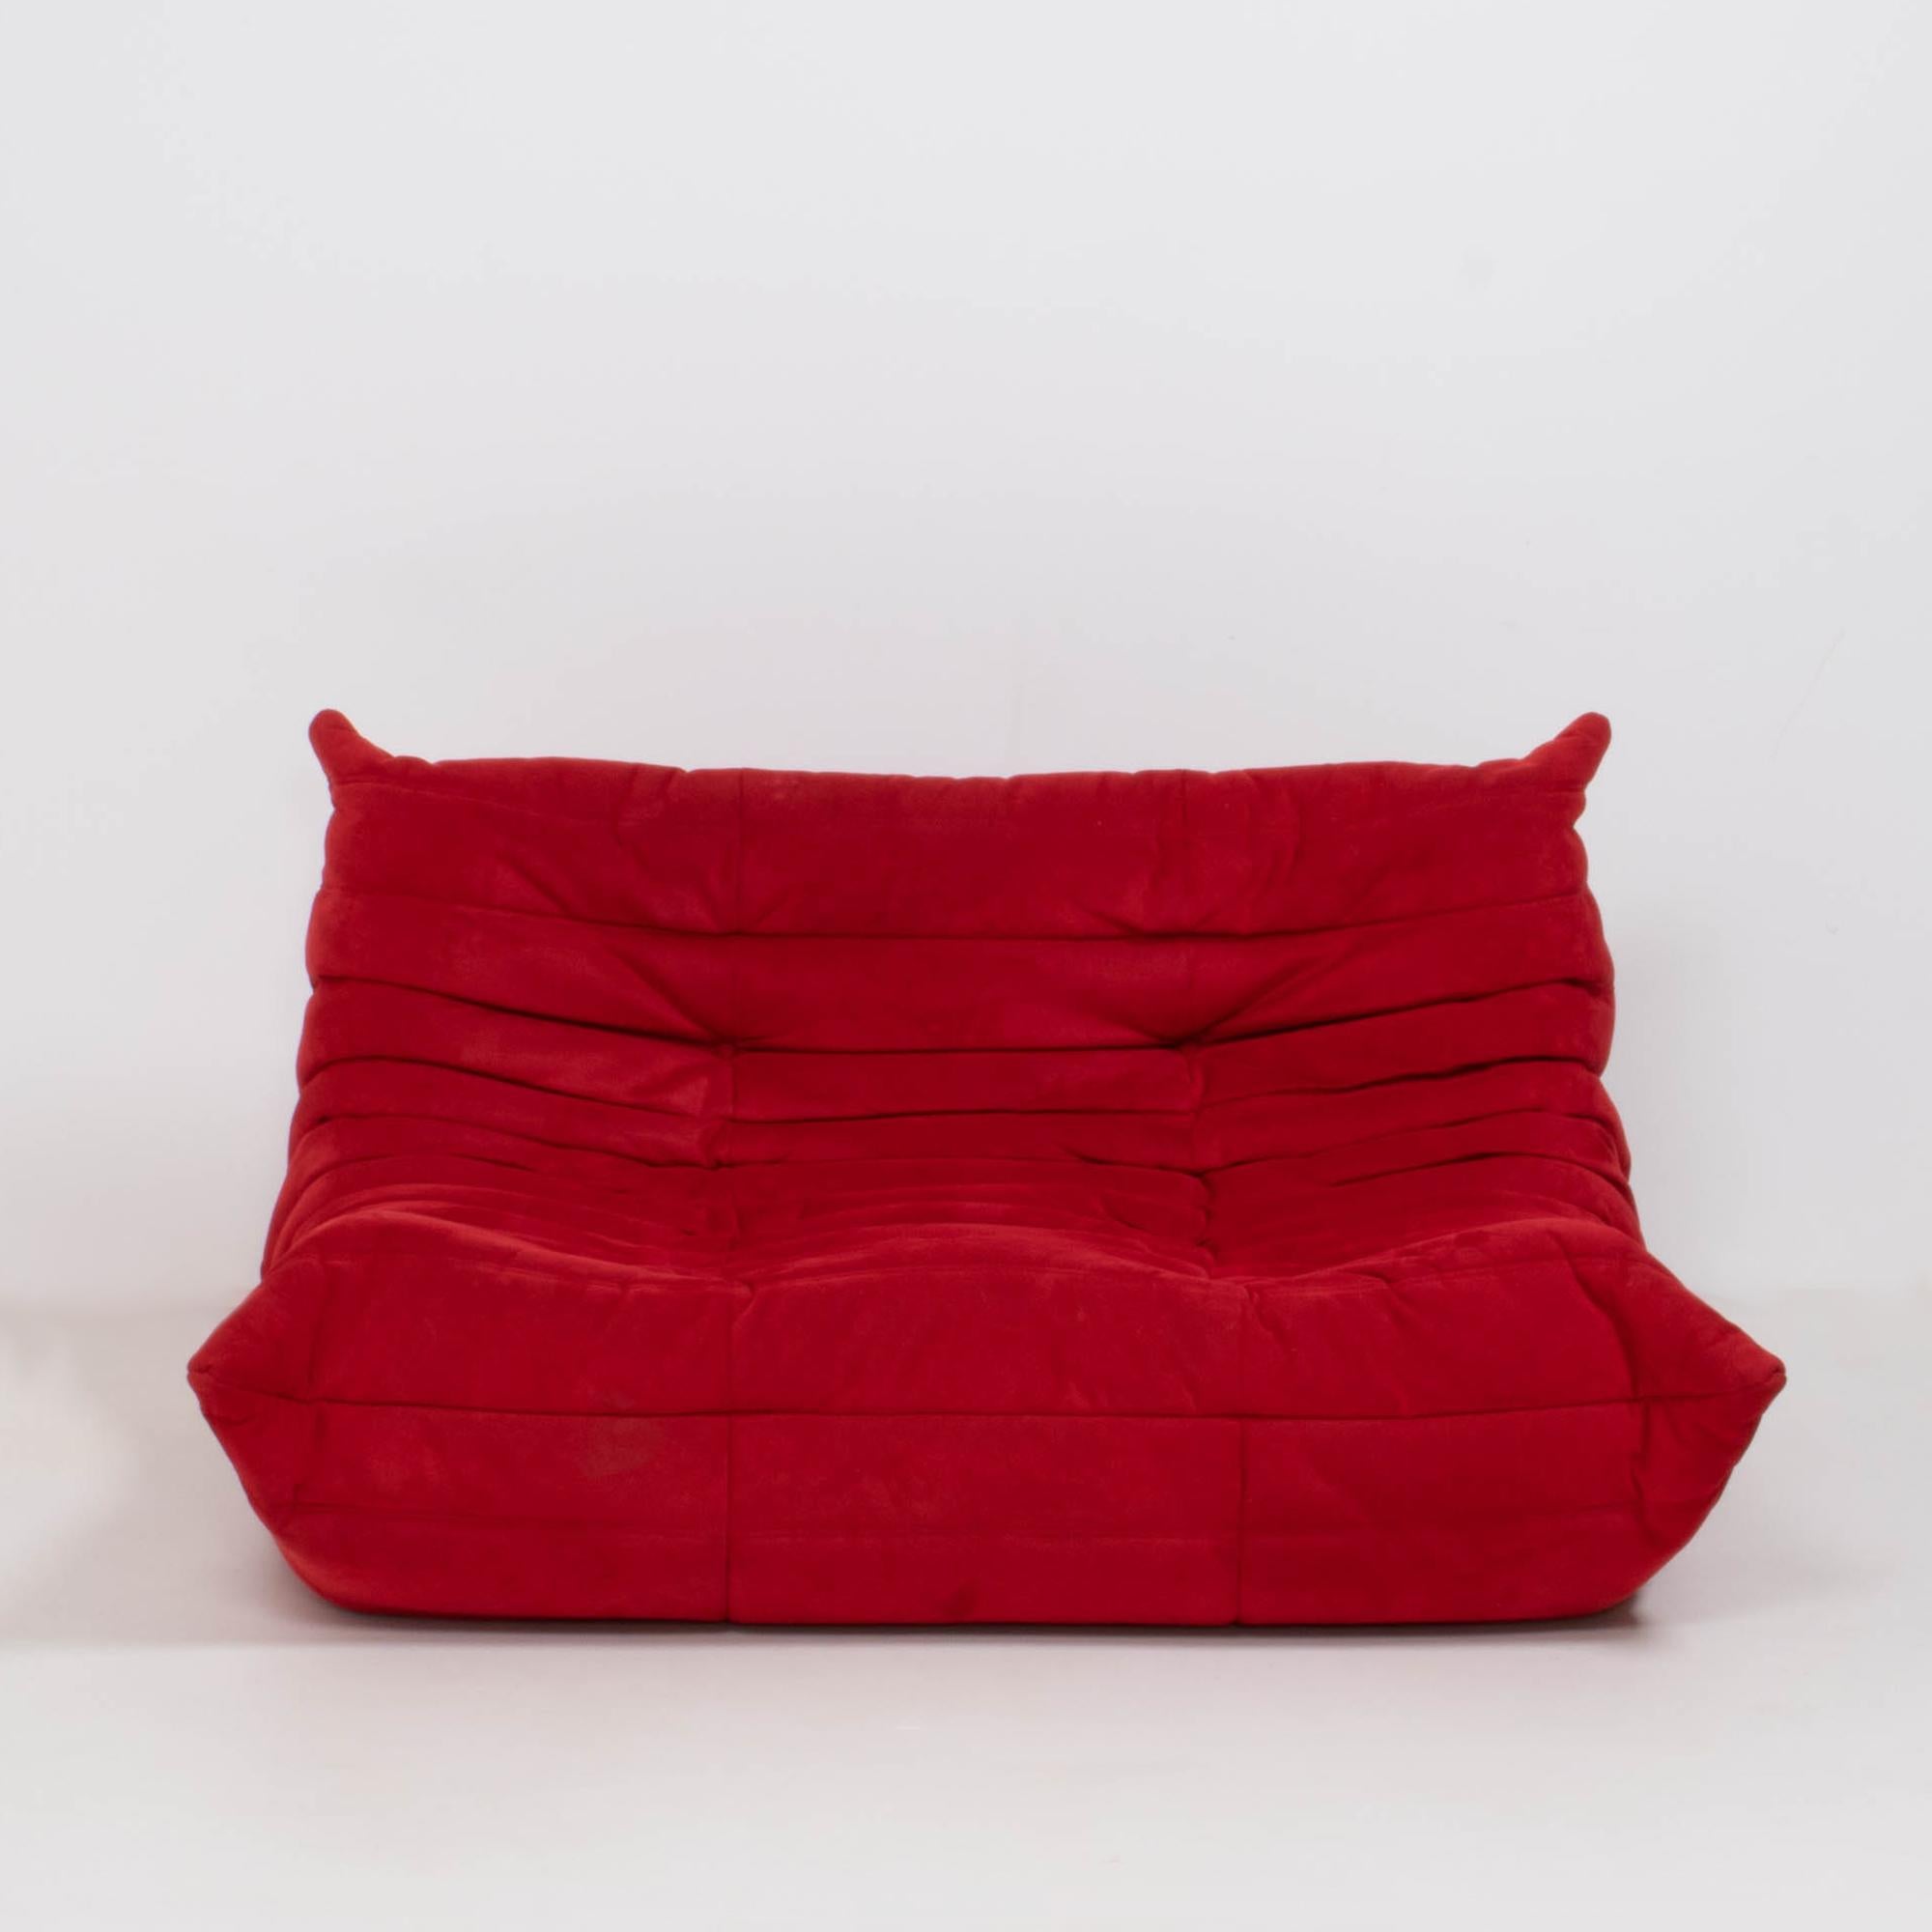 The iconic Togo sofa, originally designed by Michel Ducaroy for Ligne Roset in 1973 has become a design Classic.

Comprising of a two-seater sofa and a footstool, the set features the original red suede upholstery.

All of the pieces feature the